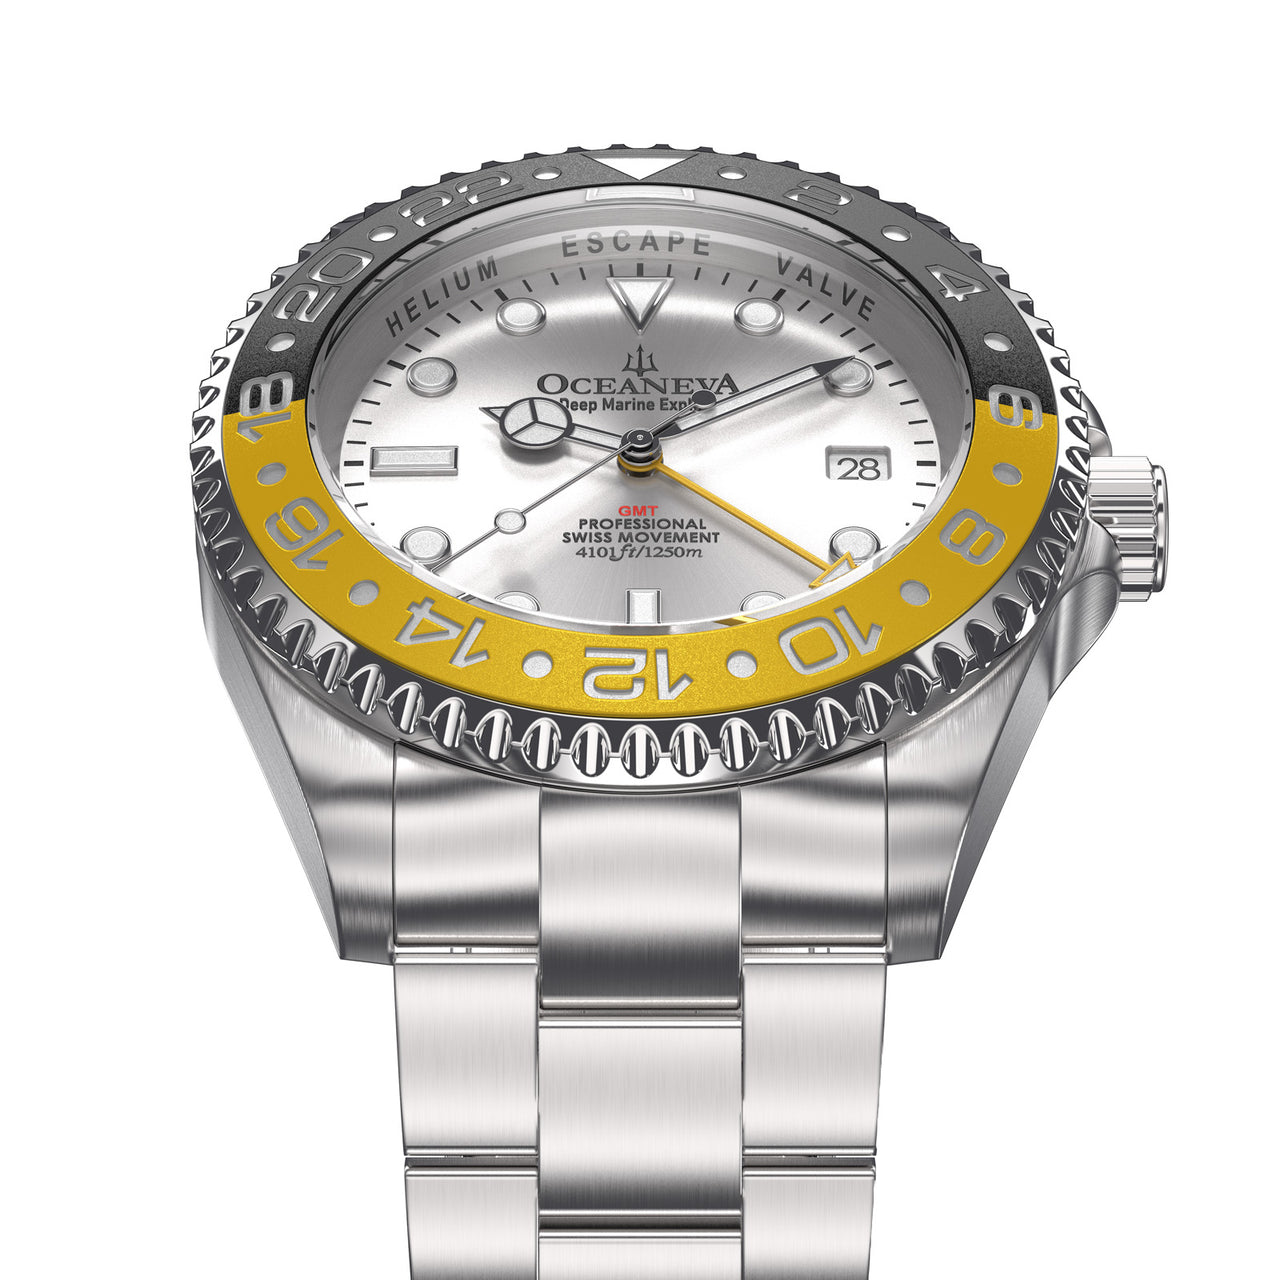 Oceaneva 1250M GMT Dive Watch Silver Black and Yellow Frontal View Picture